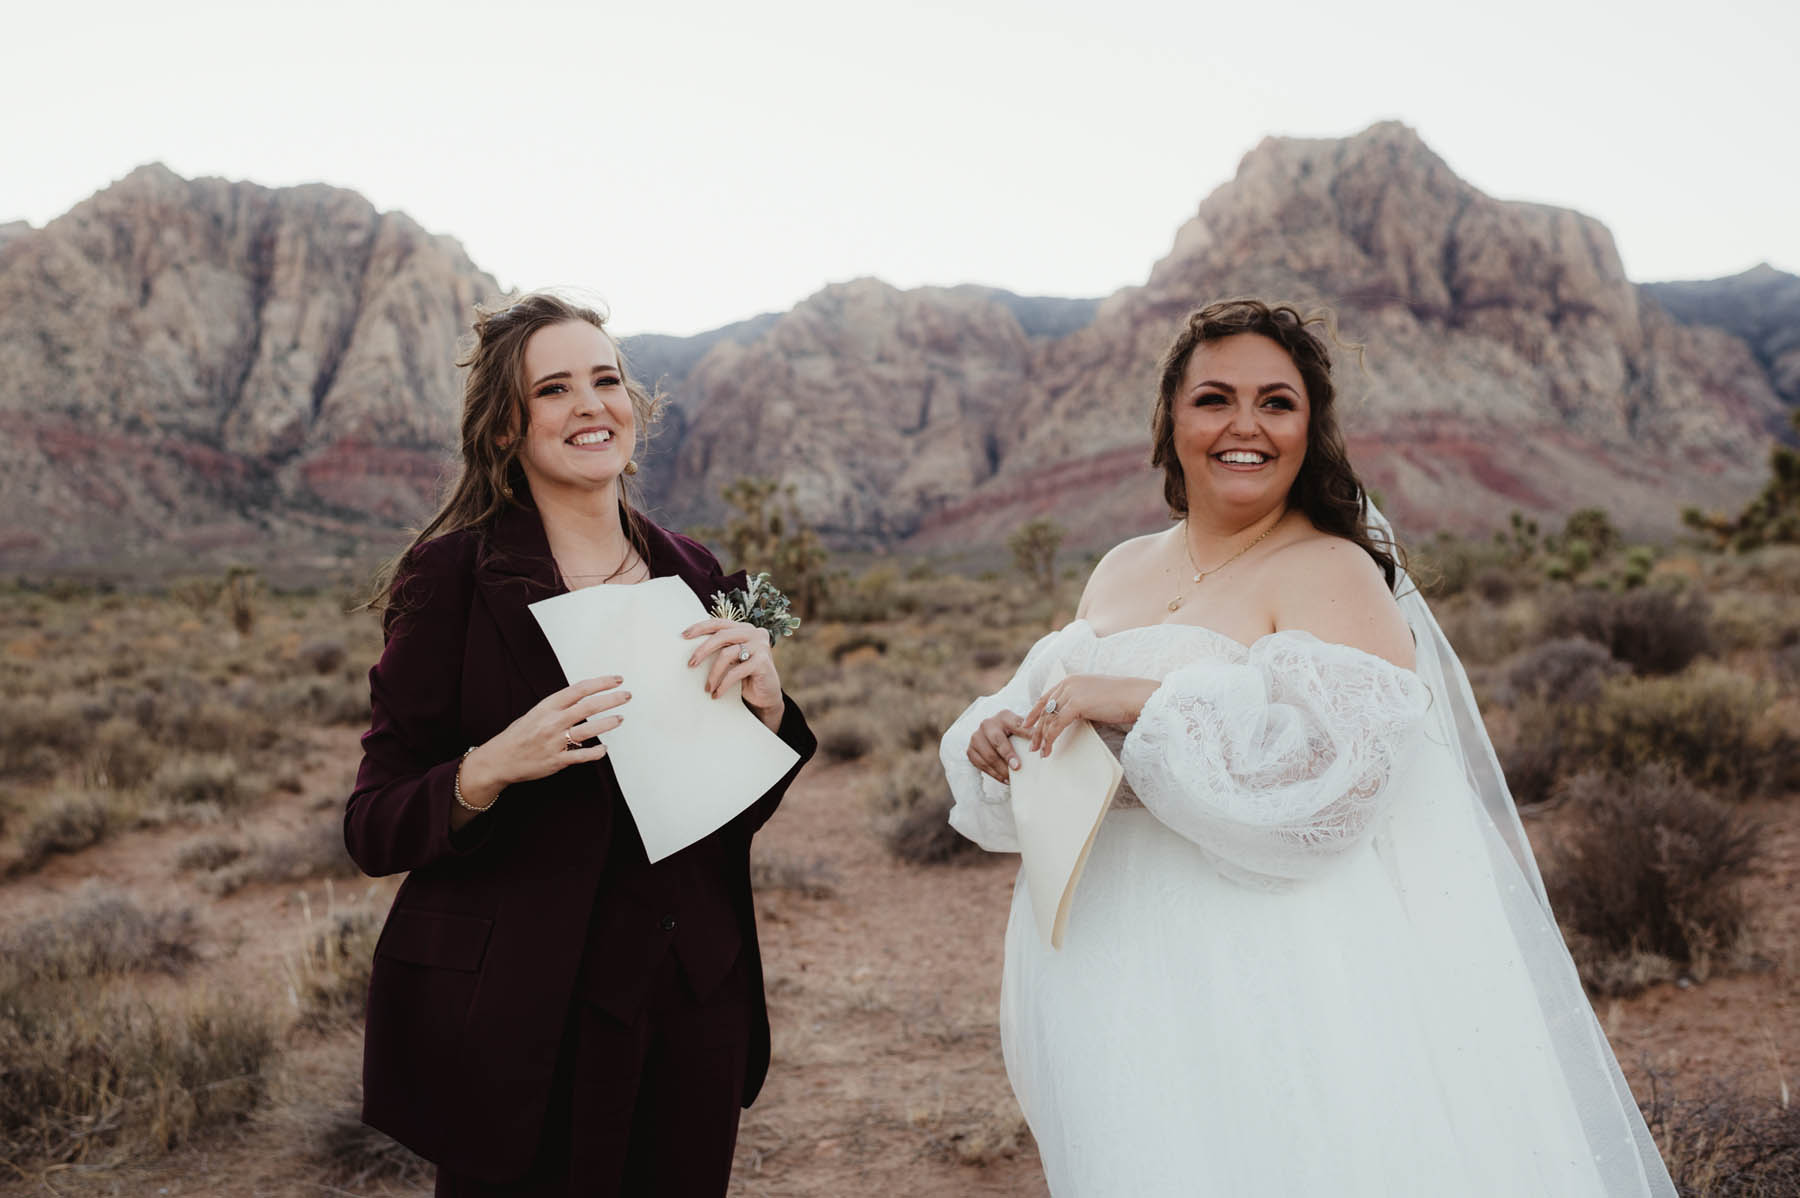 Two white brunettes stand in a desert with their vows written on paper in their hands.